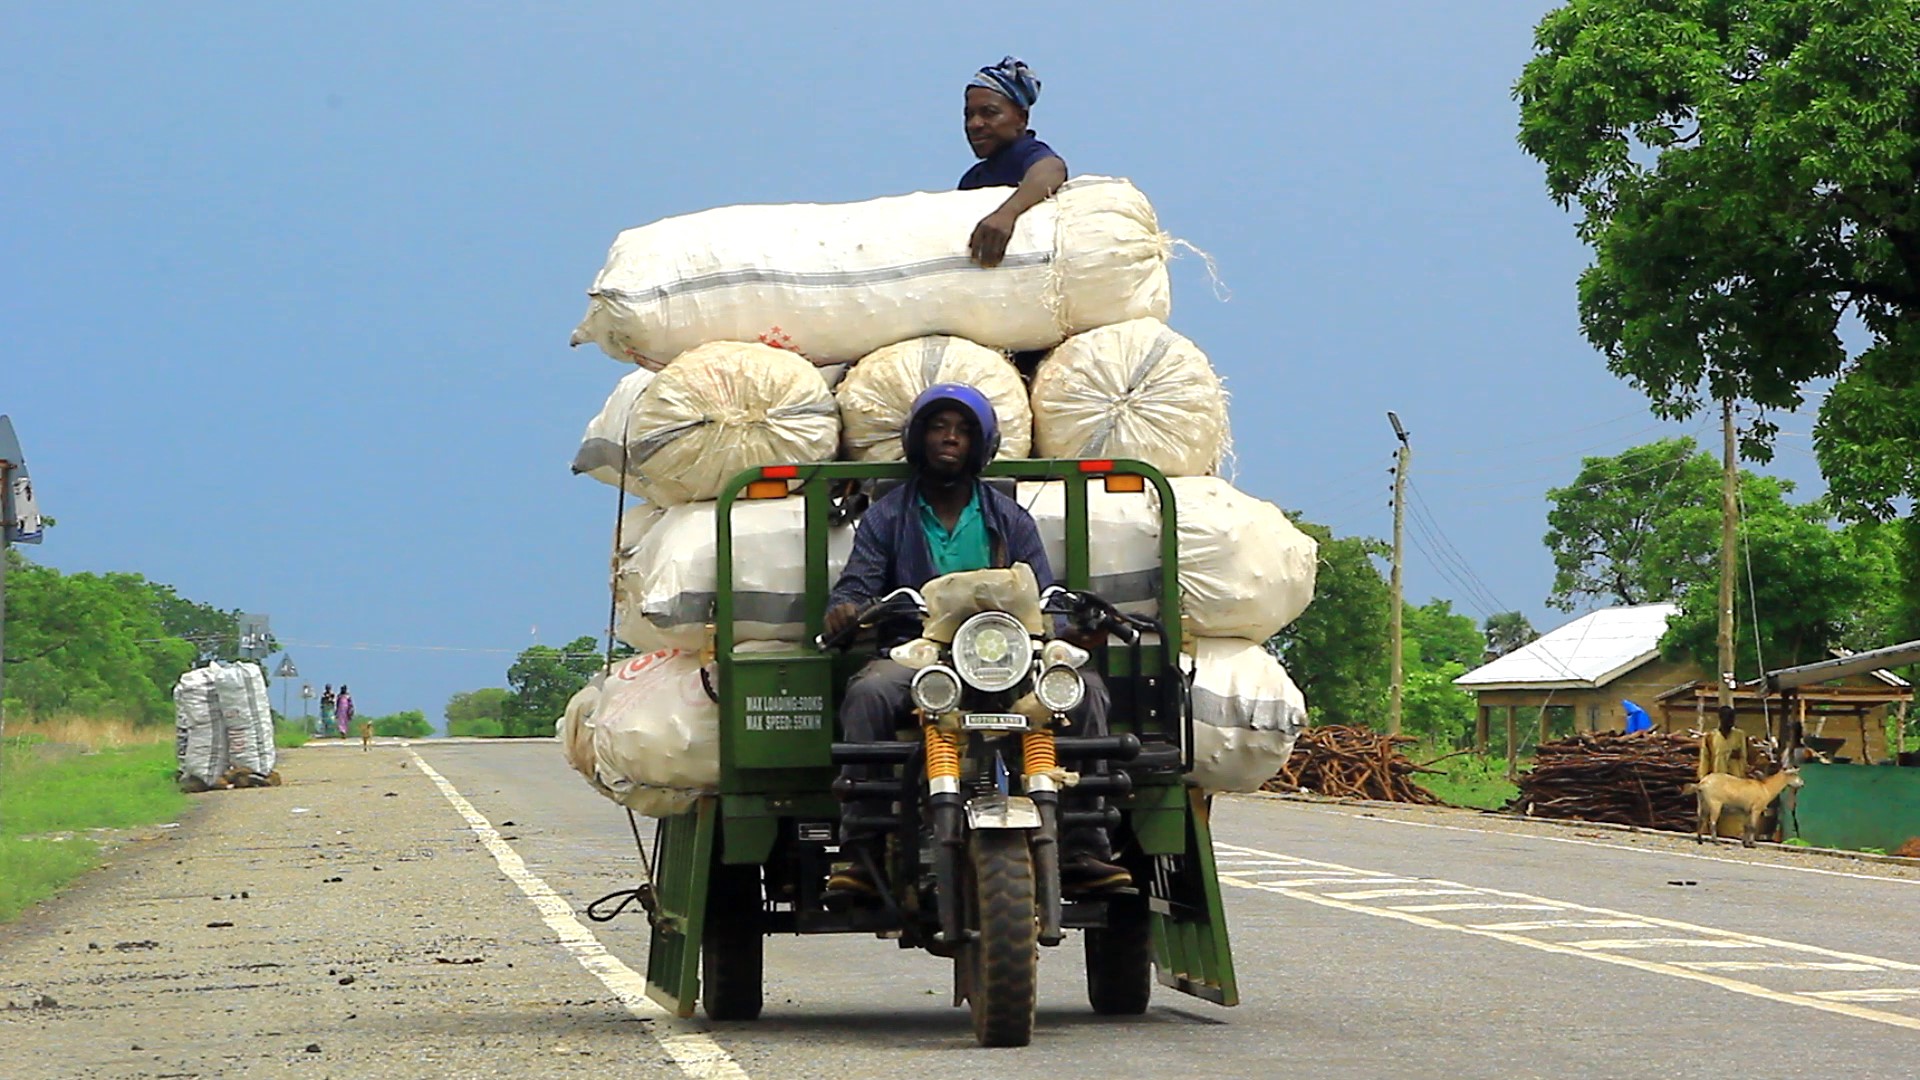 a vehicle transporting goods on the road